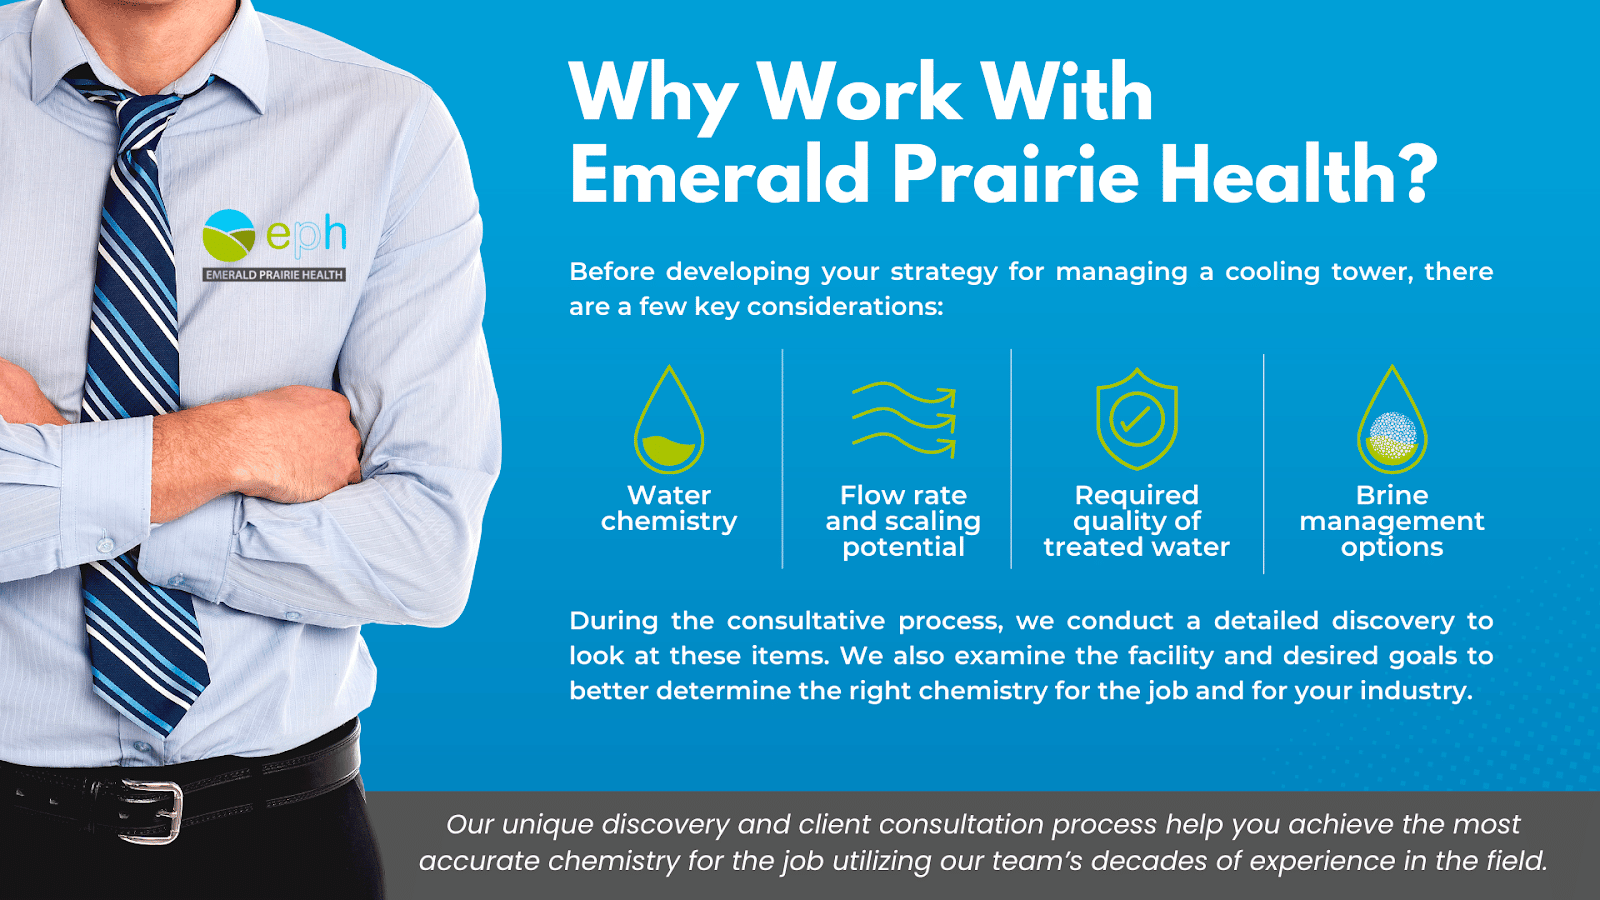 Why Work with Emeral Prairie Health copy and states out the benefits